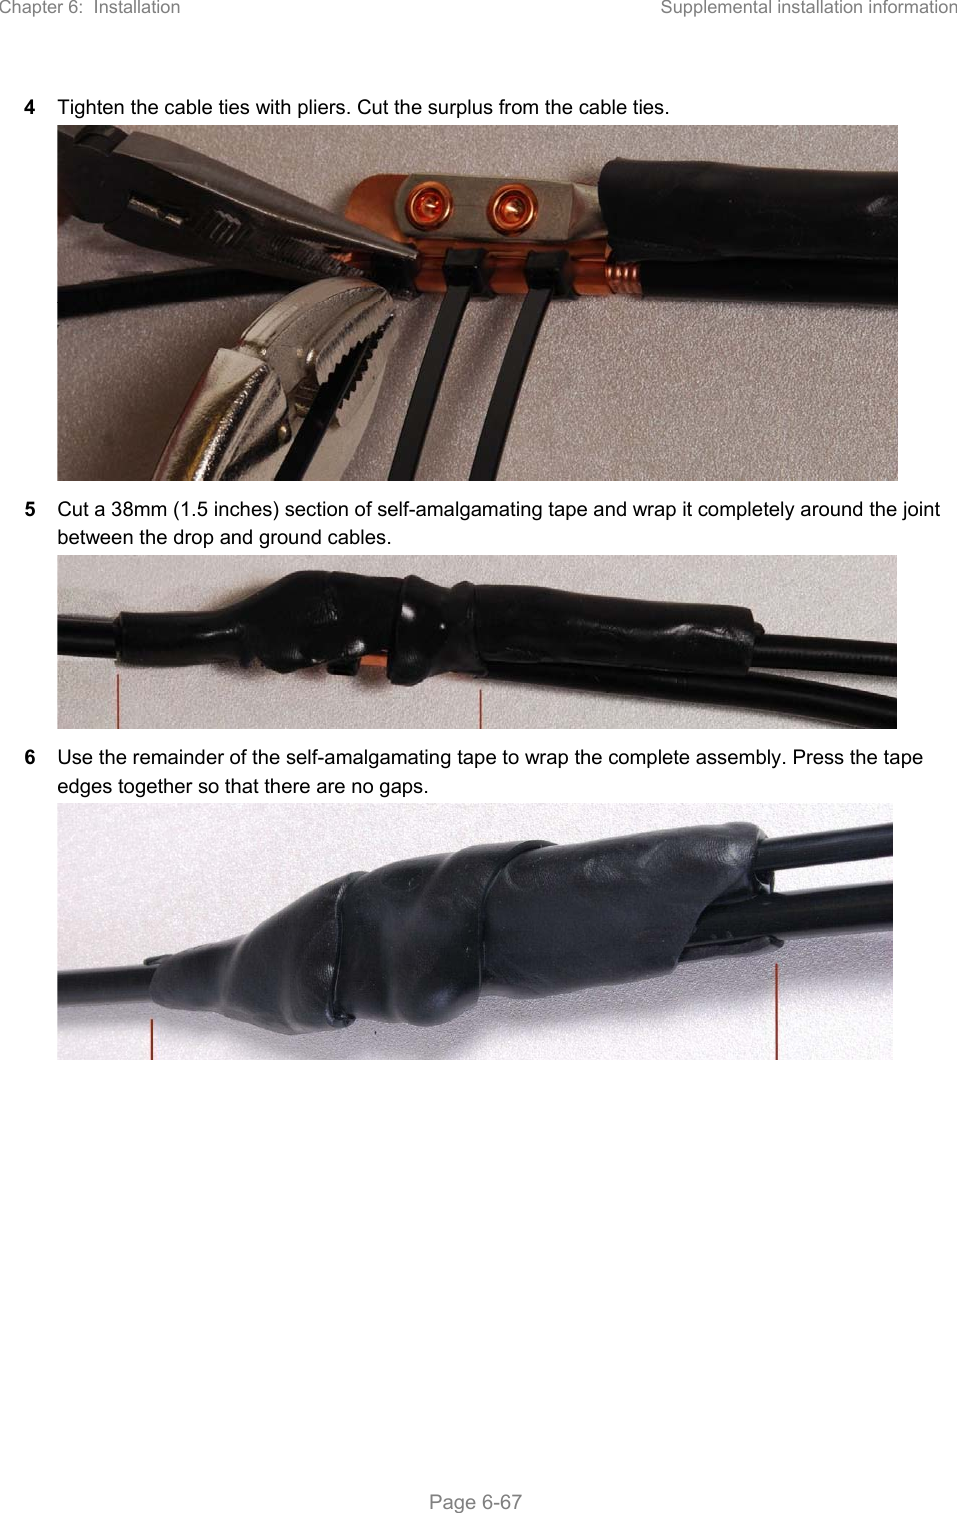 Chapter 6:  Installation  Supplemental installation information   Page 6-67 4  Tighten the cable ties with pliers. Cut the surplus from the cable ties.  5  Cut a 38mm (1.5 inches) section of self-amalgamating tape and wrap it completely around the joint between the drop and ground cables.  6  Use the remainder of the self-amalgamating tape to wrap the complete assembly. Press the tape edges together so that there are no gaps.  